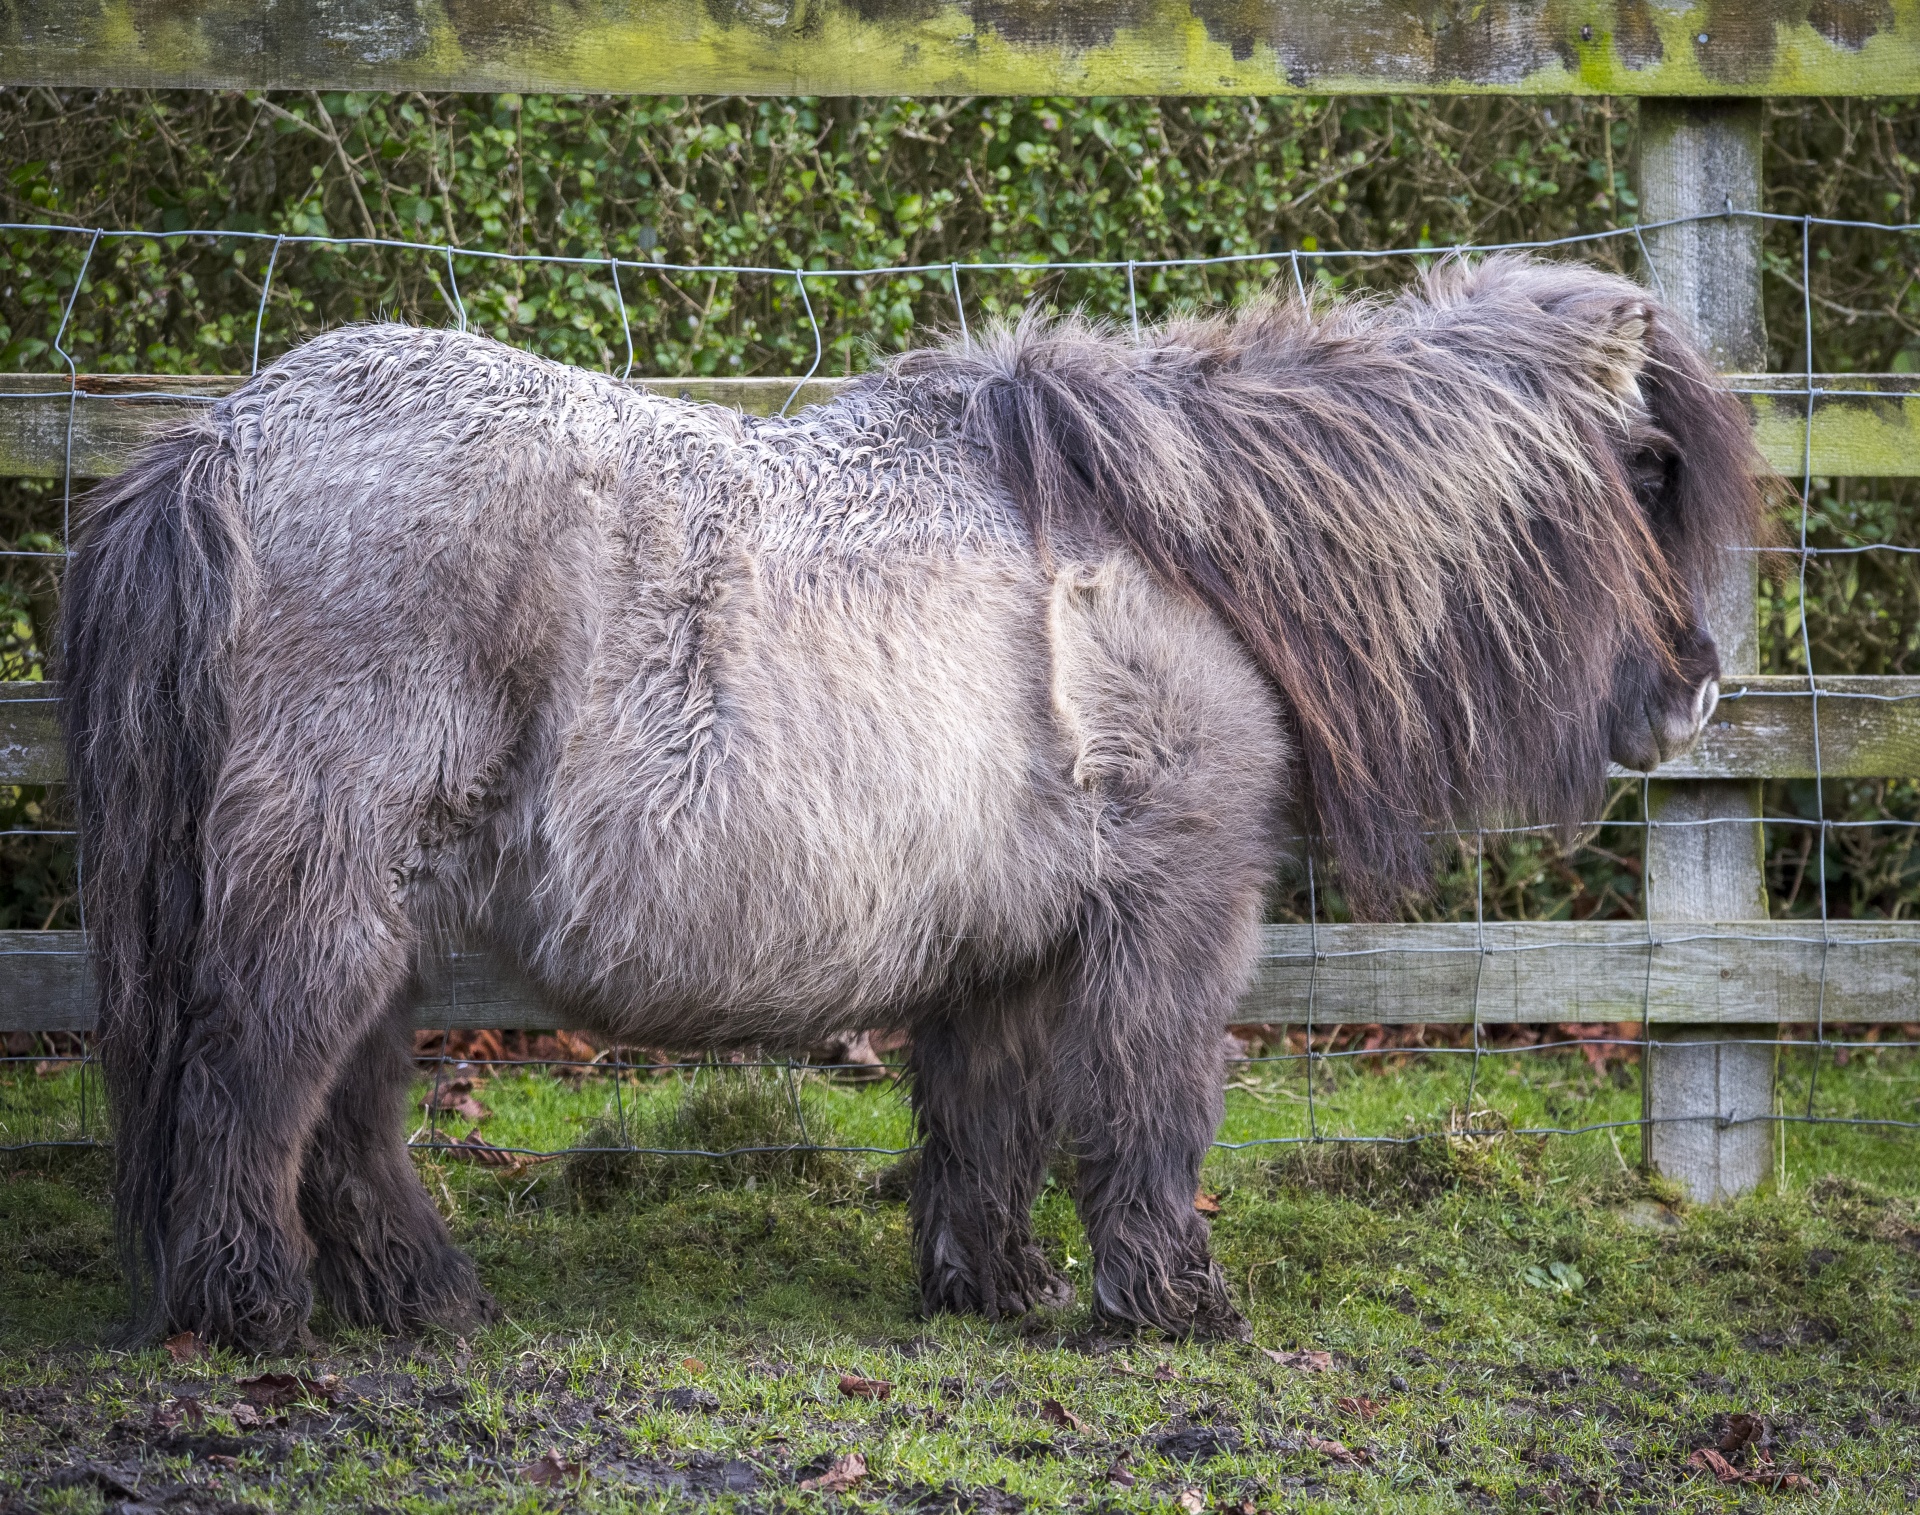 Shetland pony is a breed of pony originating in the Shetland Isles. Shetlands range in size from a minimum height of approximately 28 inches to an official maximum height of 42 inches